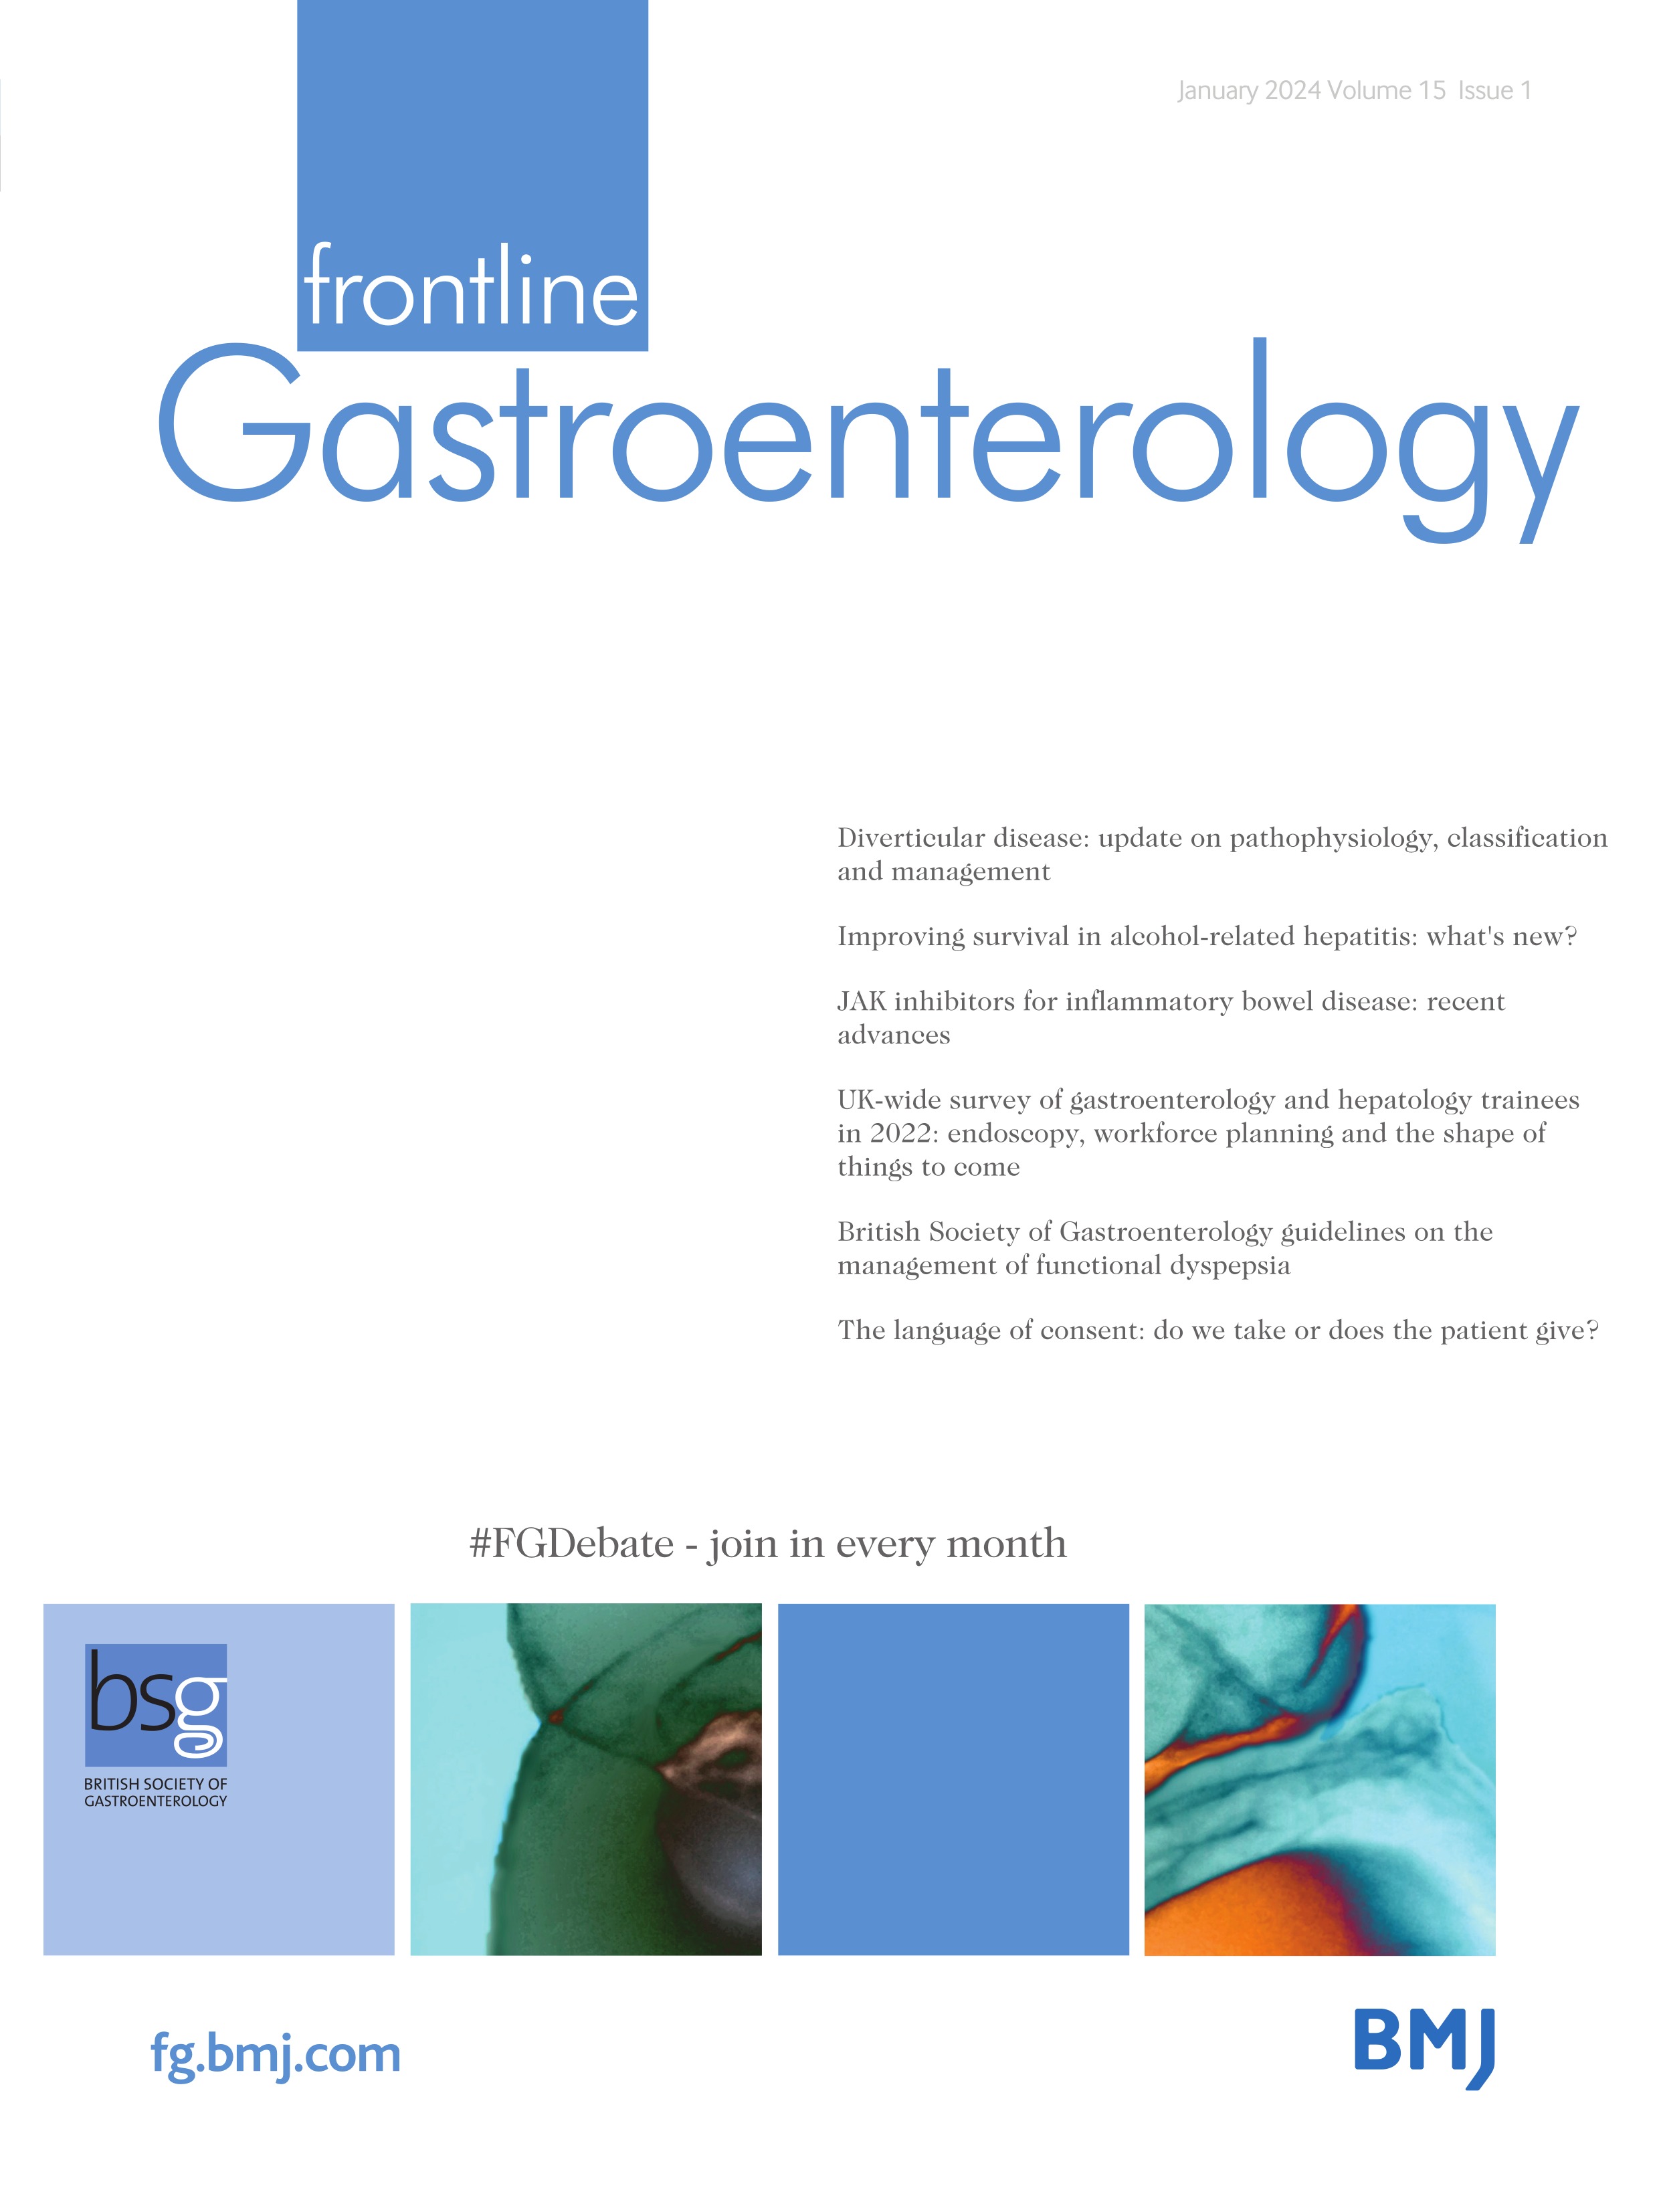 British Society of Gastroenterology guidelines on the management of functional dyspepsia